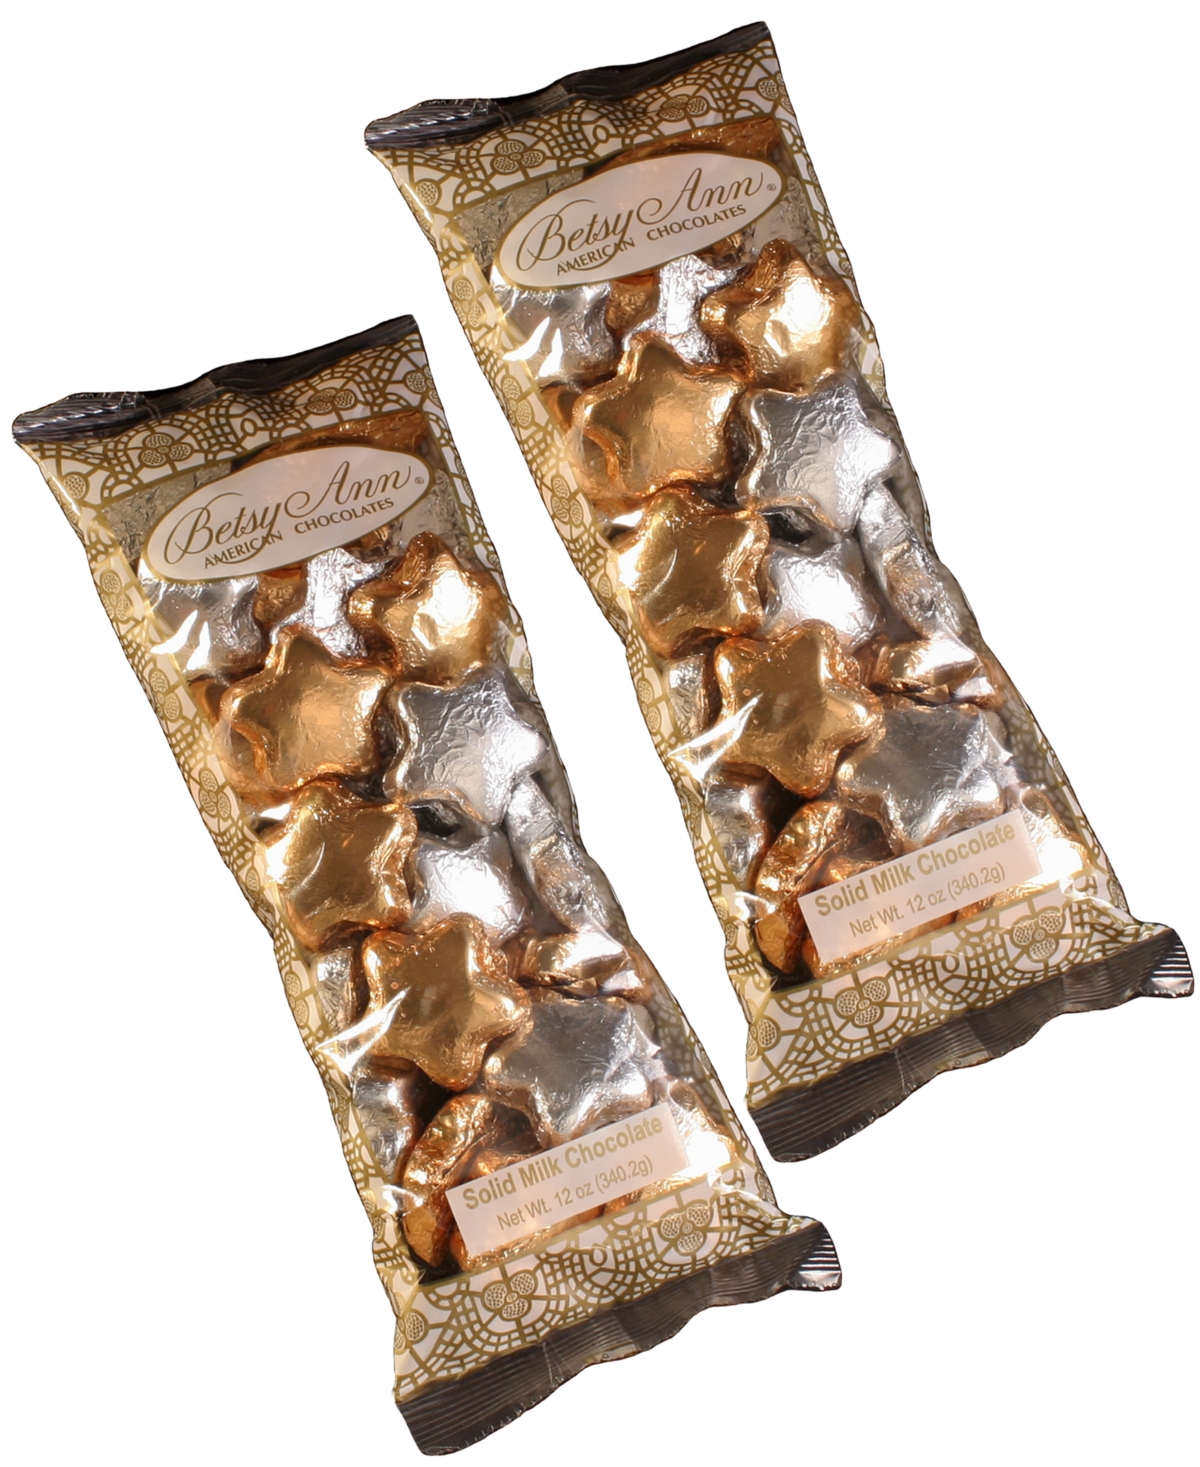 Betsy Ann Chocolates Betsy Ann 12 oz Milk Chocolate Foil Wrapped Star Shaped Chocolates, Pack Of 2